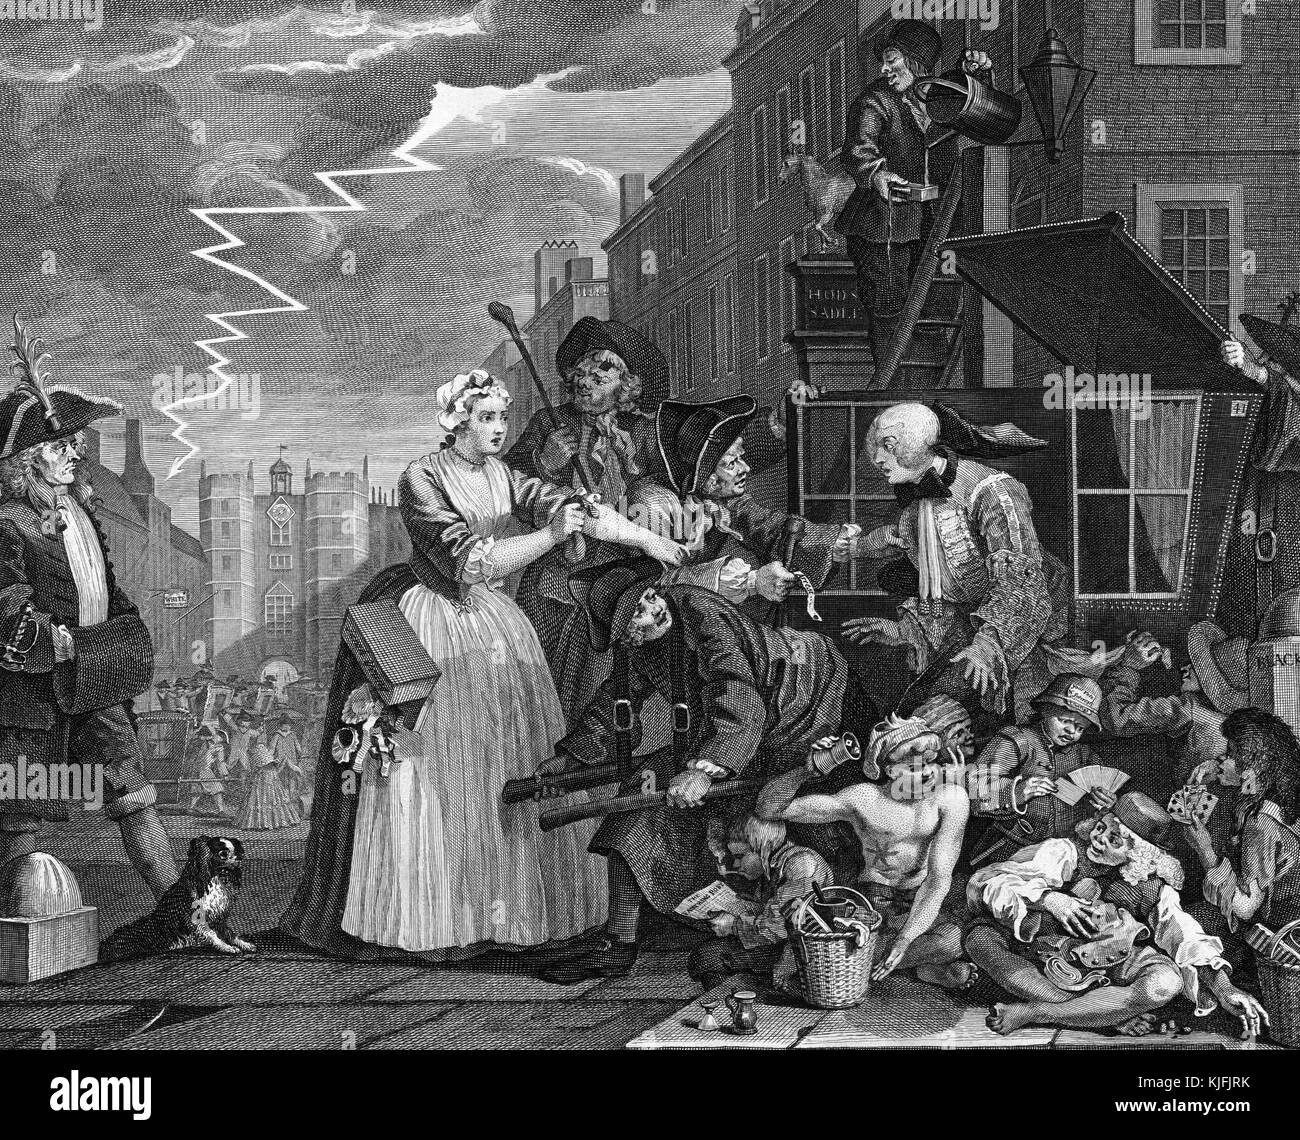 Etching and engraving on paper depicting a scene in Saint James's Street with a man emerging from a sedan-chair to be arrested for debt; figures in the foreground include a Welshman, Sarah Young dropping her seamstress's box as she offers a purse of money, a lamp-lighter carelessly spilling oil, and a group of street-boys who gamble with dice and cards beside a post labelled 'Black', in the distance is the gate of Saint James's Palace with a crowd of sedan-chairs approaching to celebrate the birthday of Queen Caroline, a streak of lightning flashes across the sky, by William Hogarth, 1735. Fro Stock Photo